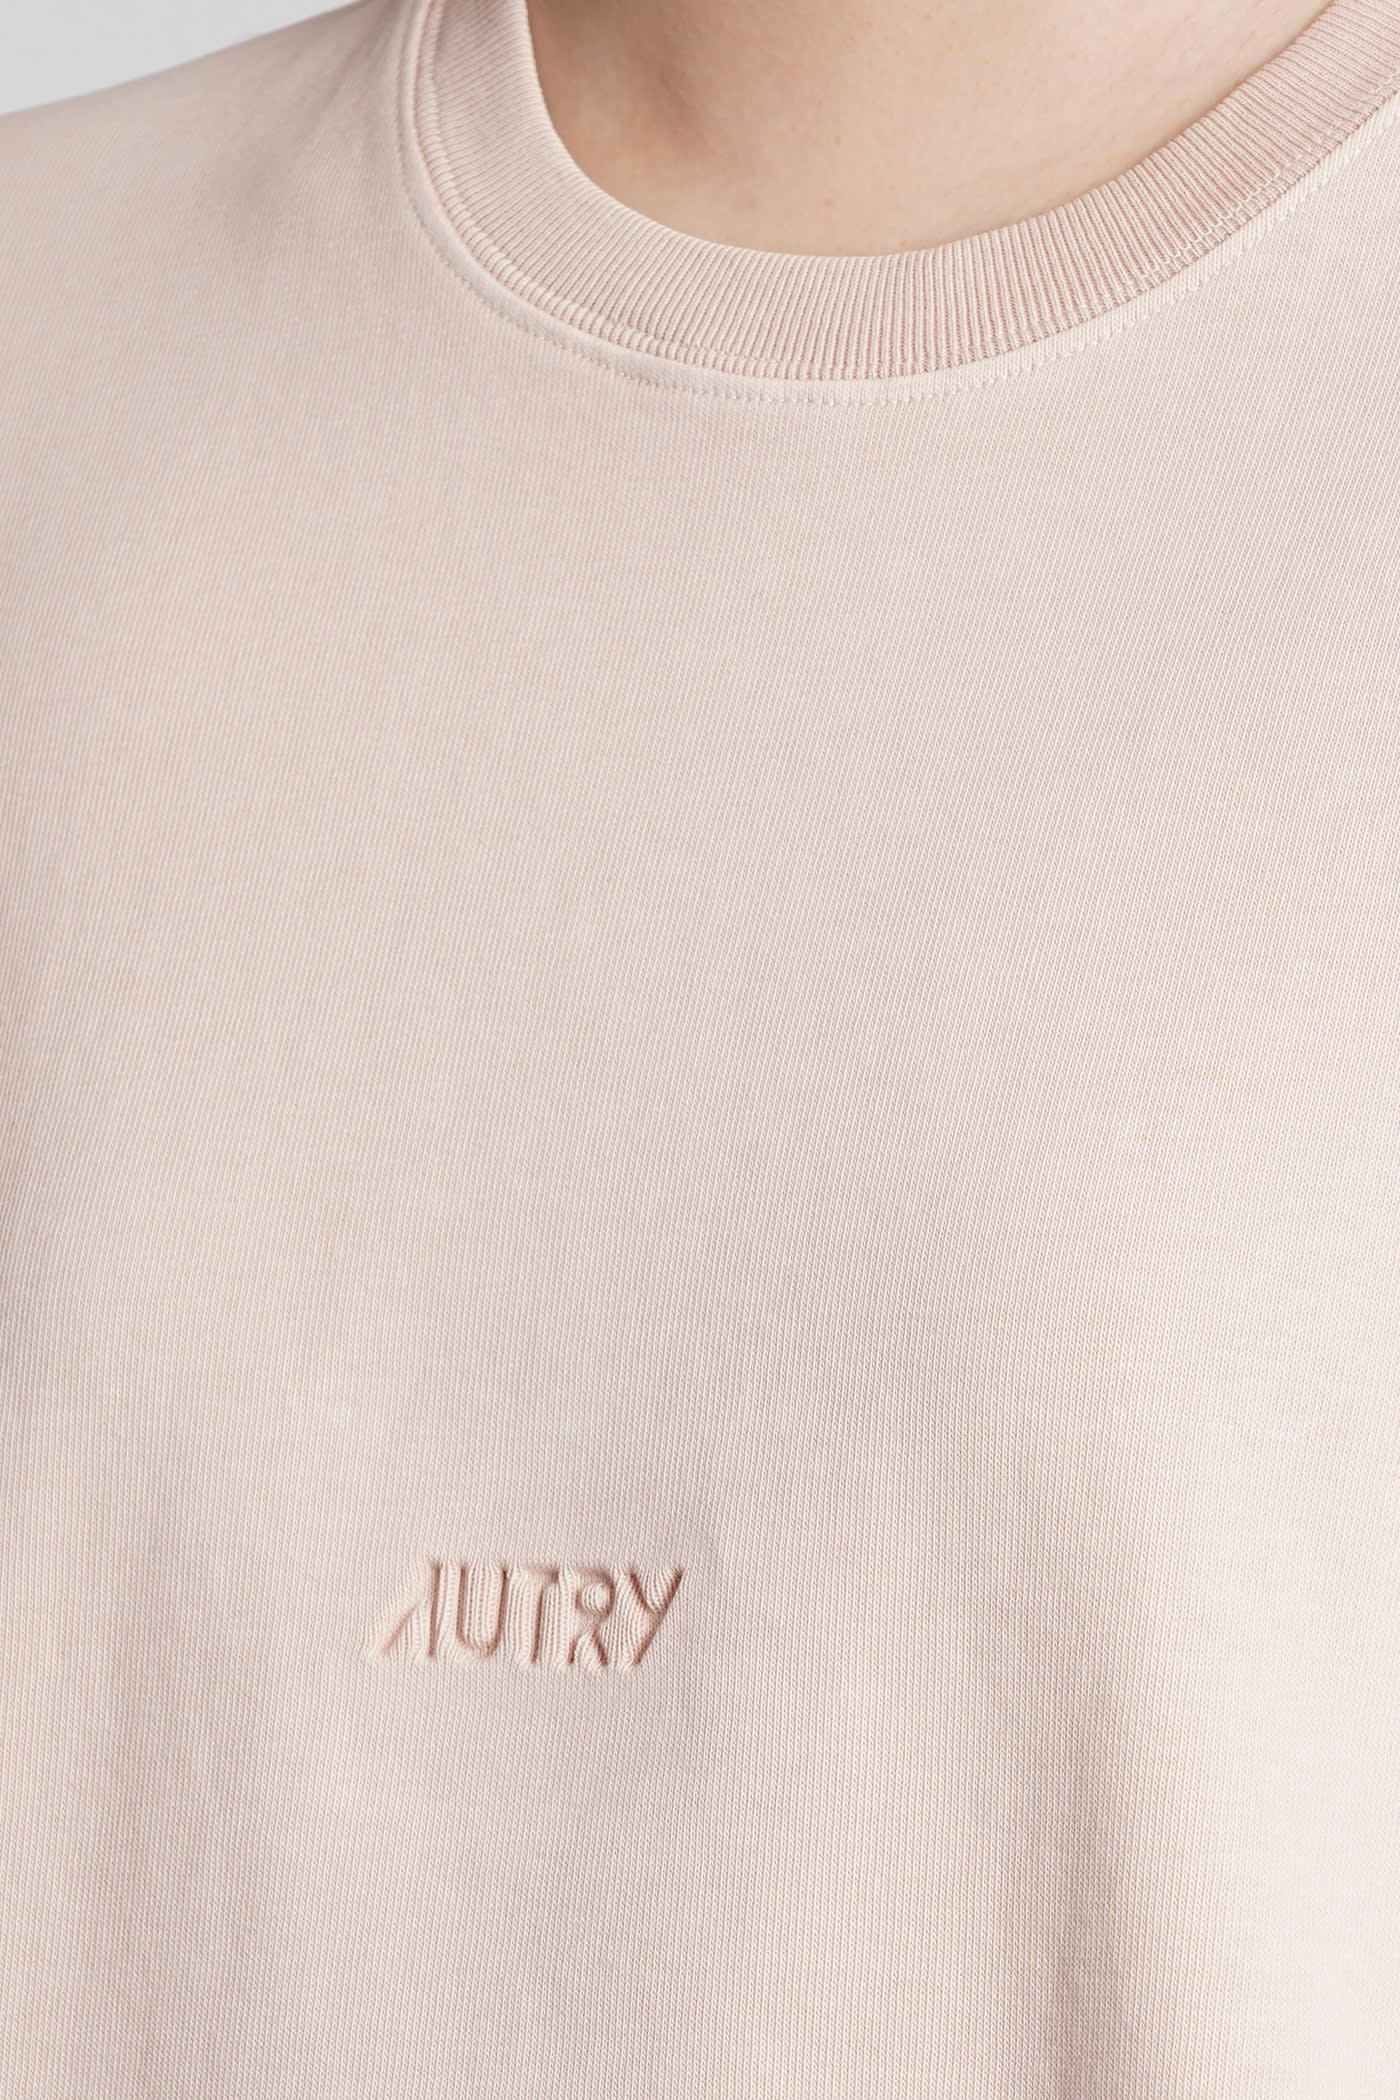 Shop Autry T-shirt In Rose-pink Cotton